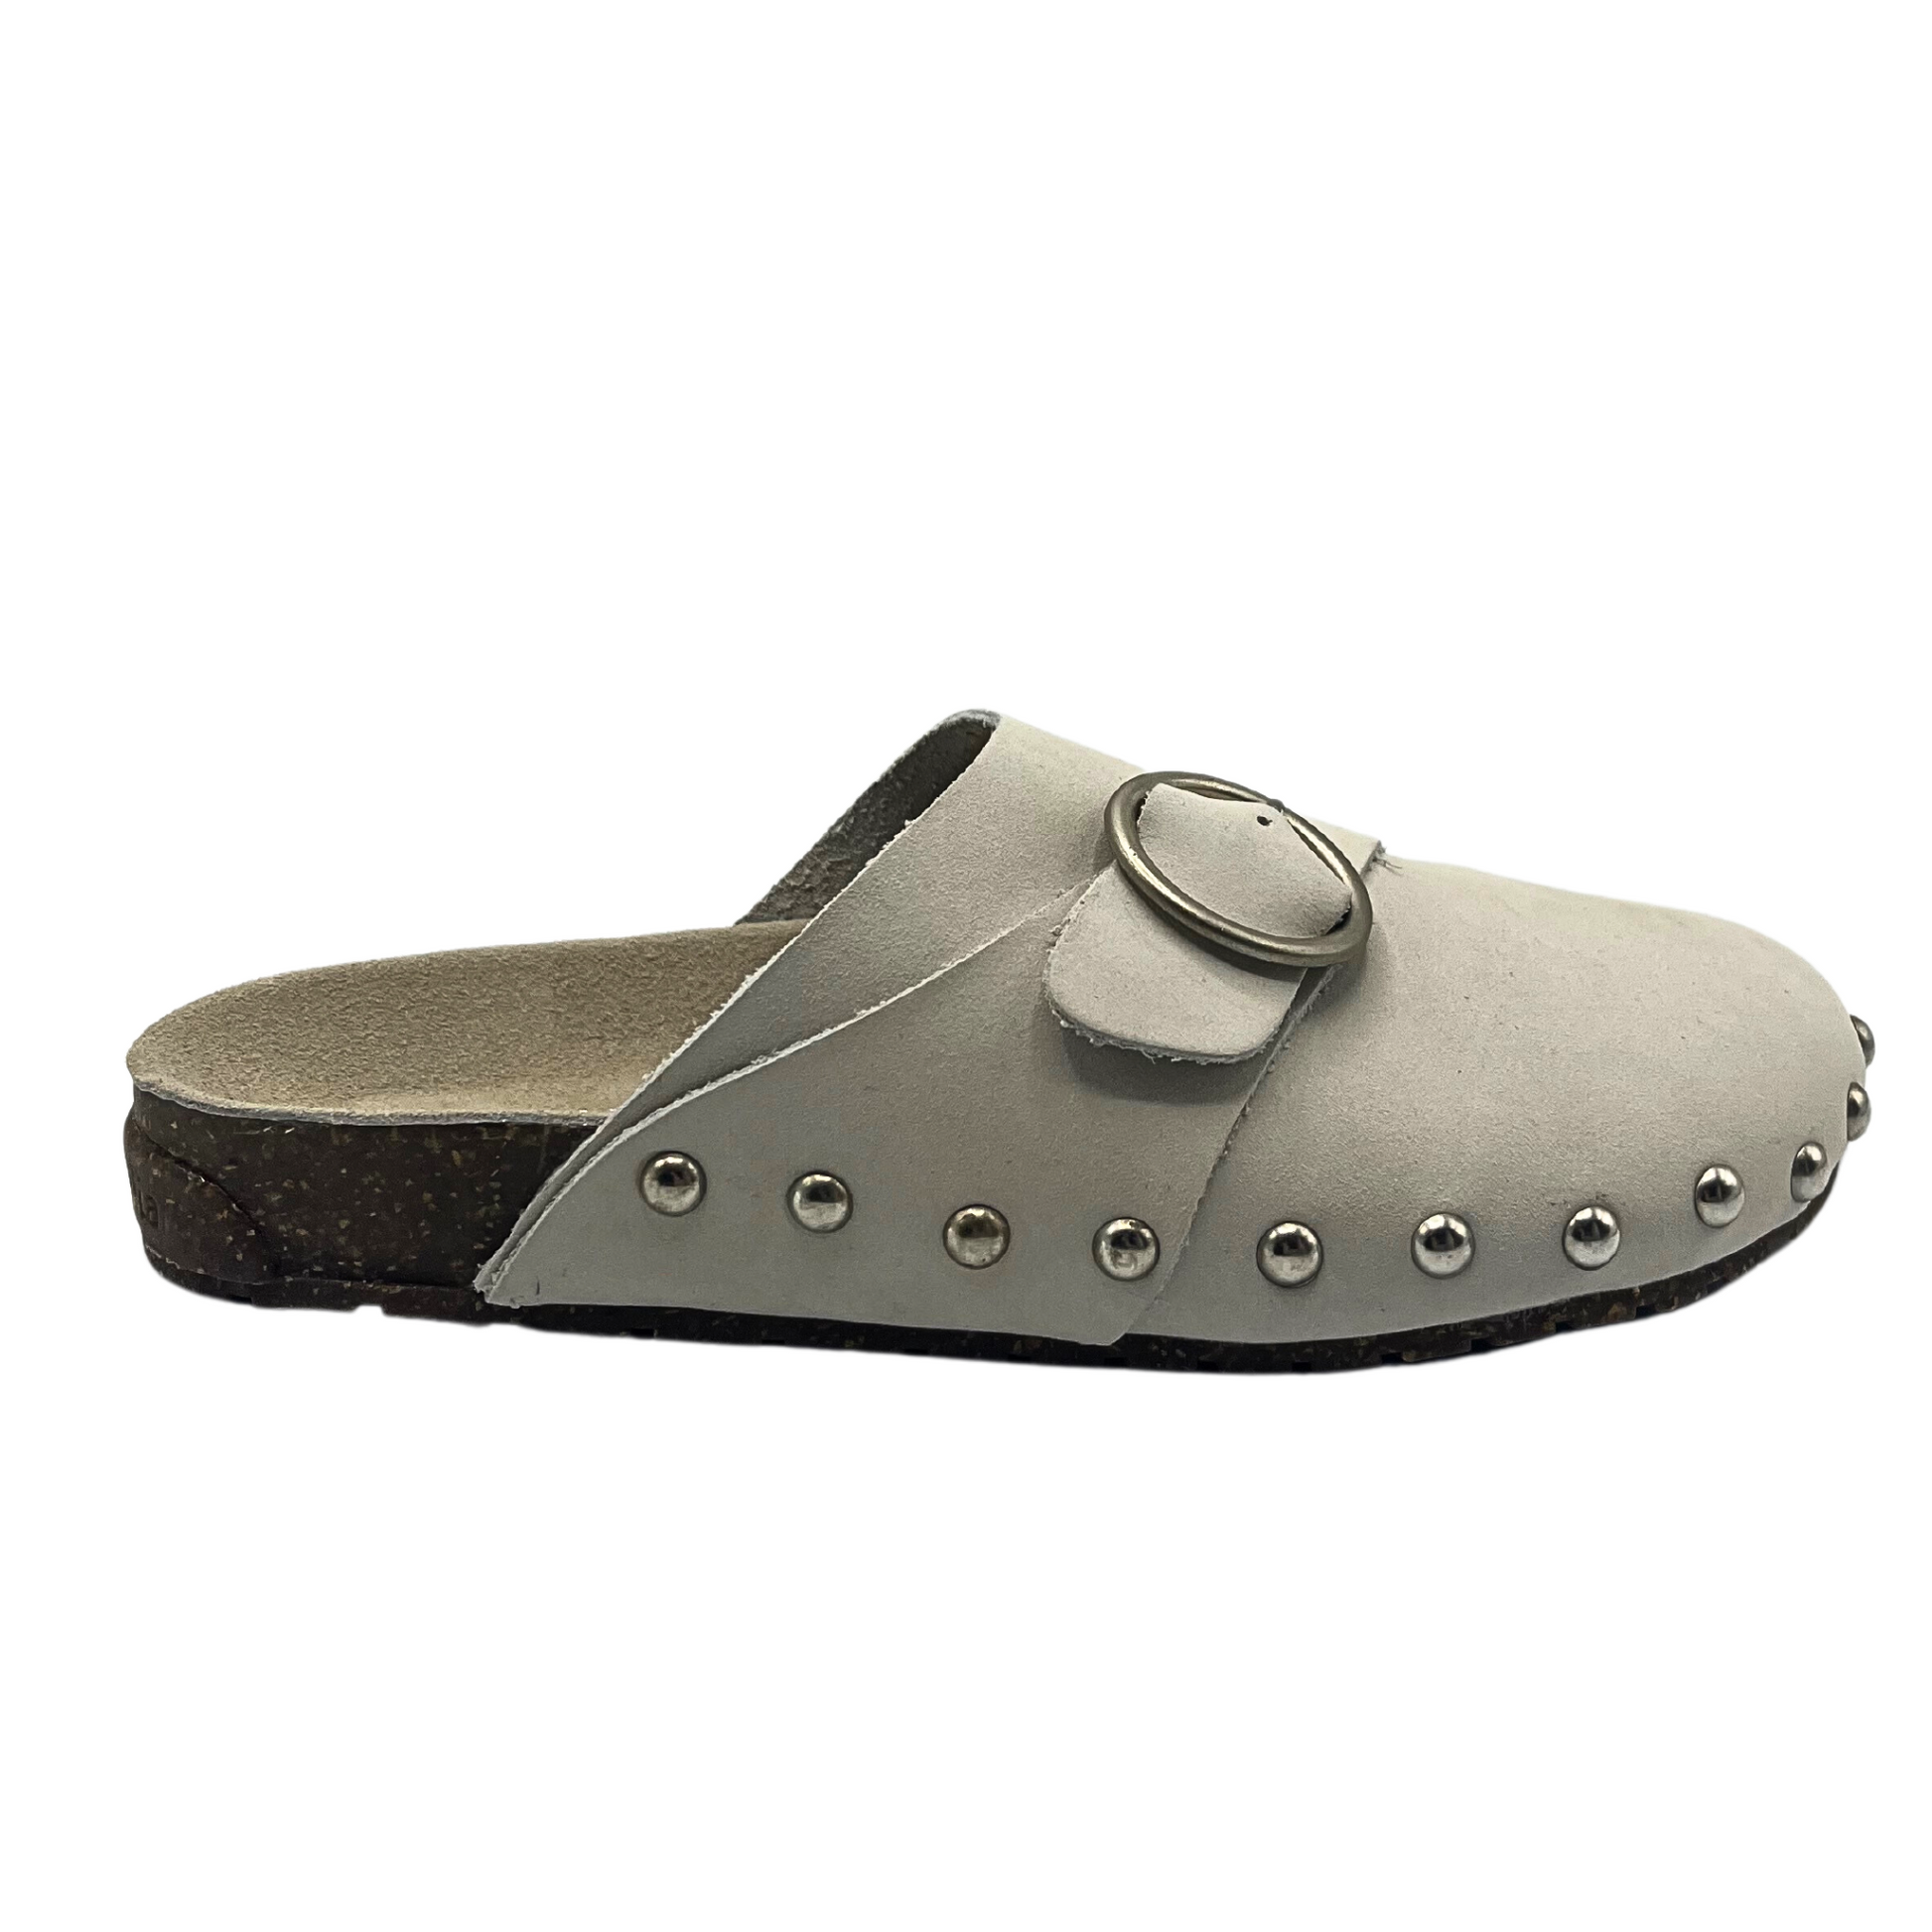 Outside view of closed toe slide with ergonomic footbed